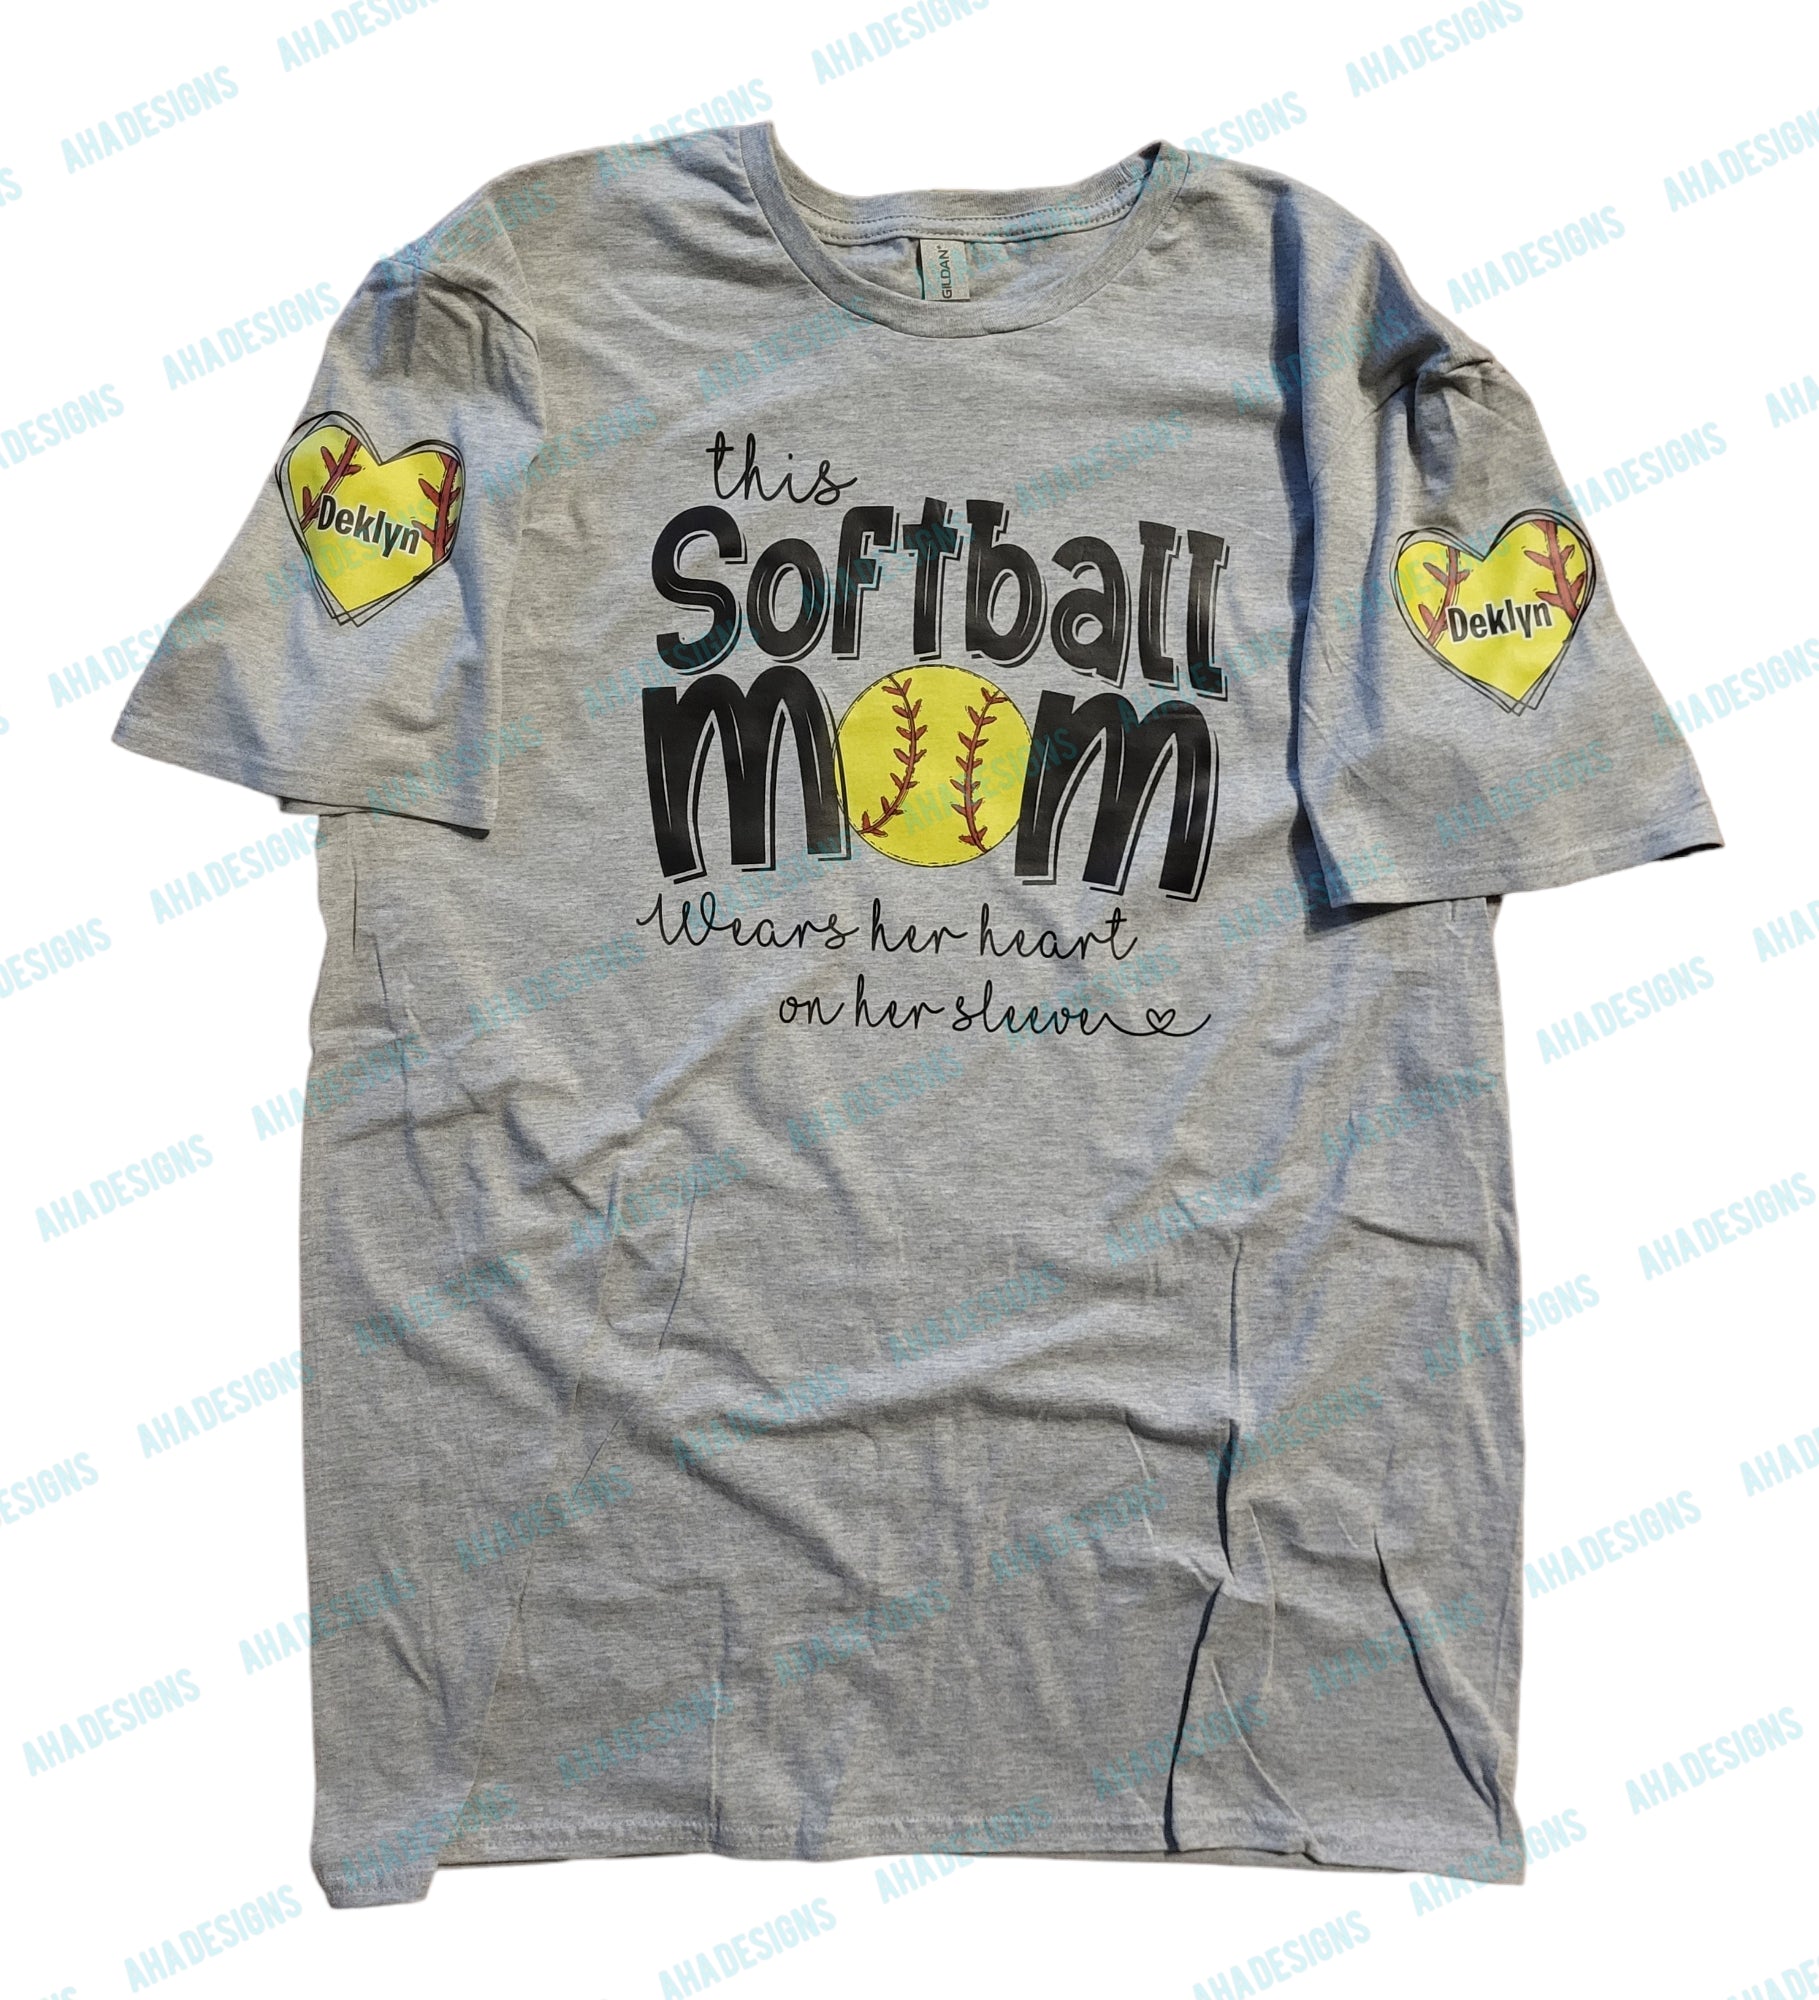 This Mom Wears Her Heart on Her Sleeve Personalized Softball Tee